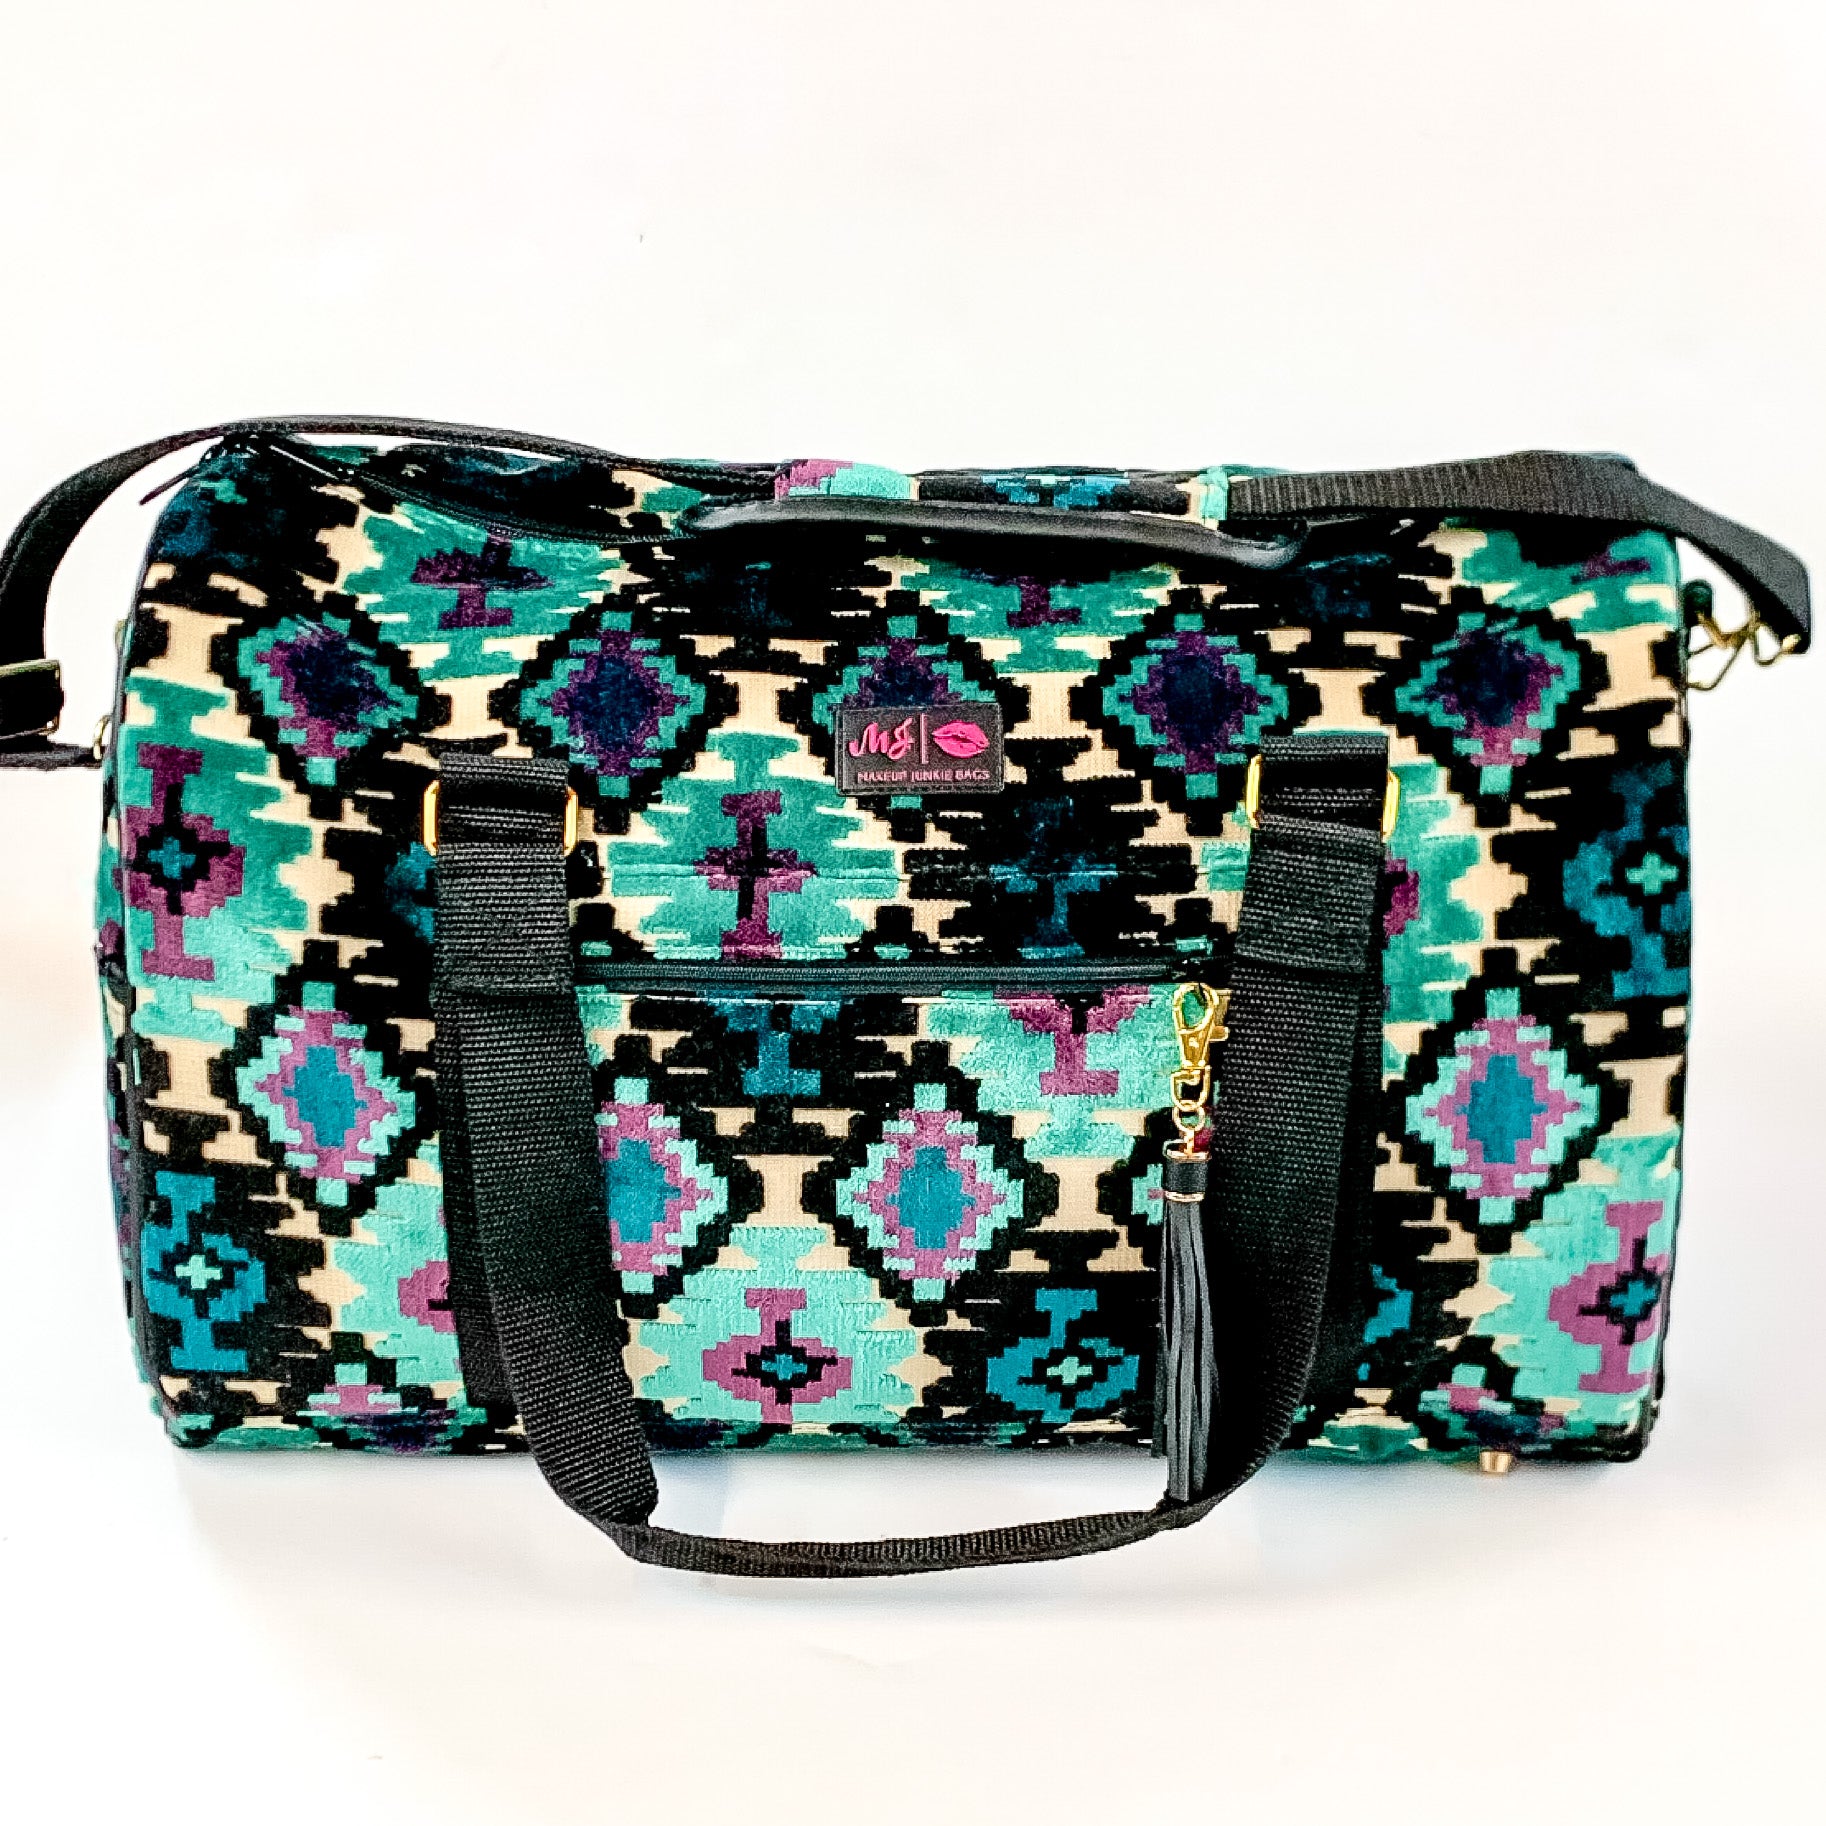 Makeup Junkie | Midnight Aztec Duffel Bag in Turquoise Green and Black Mix